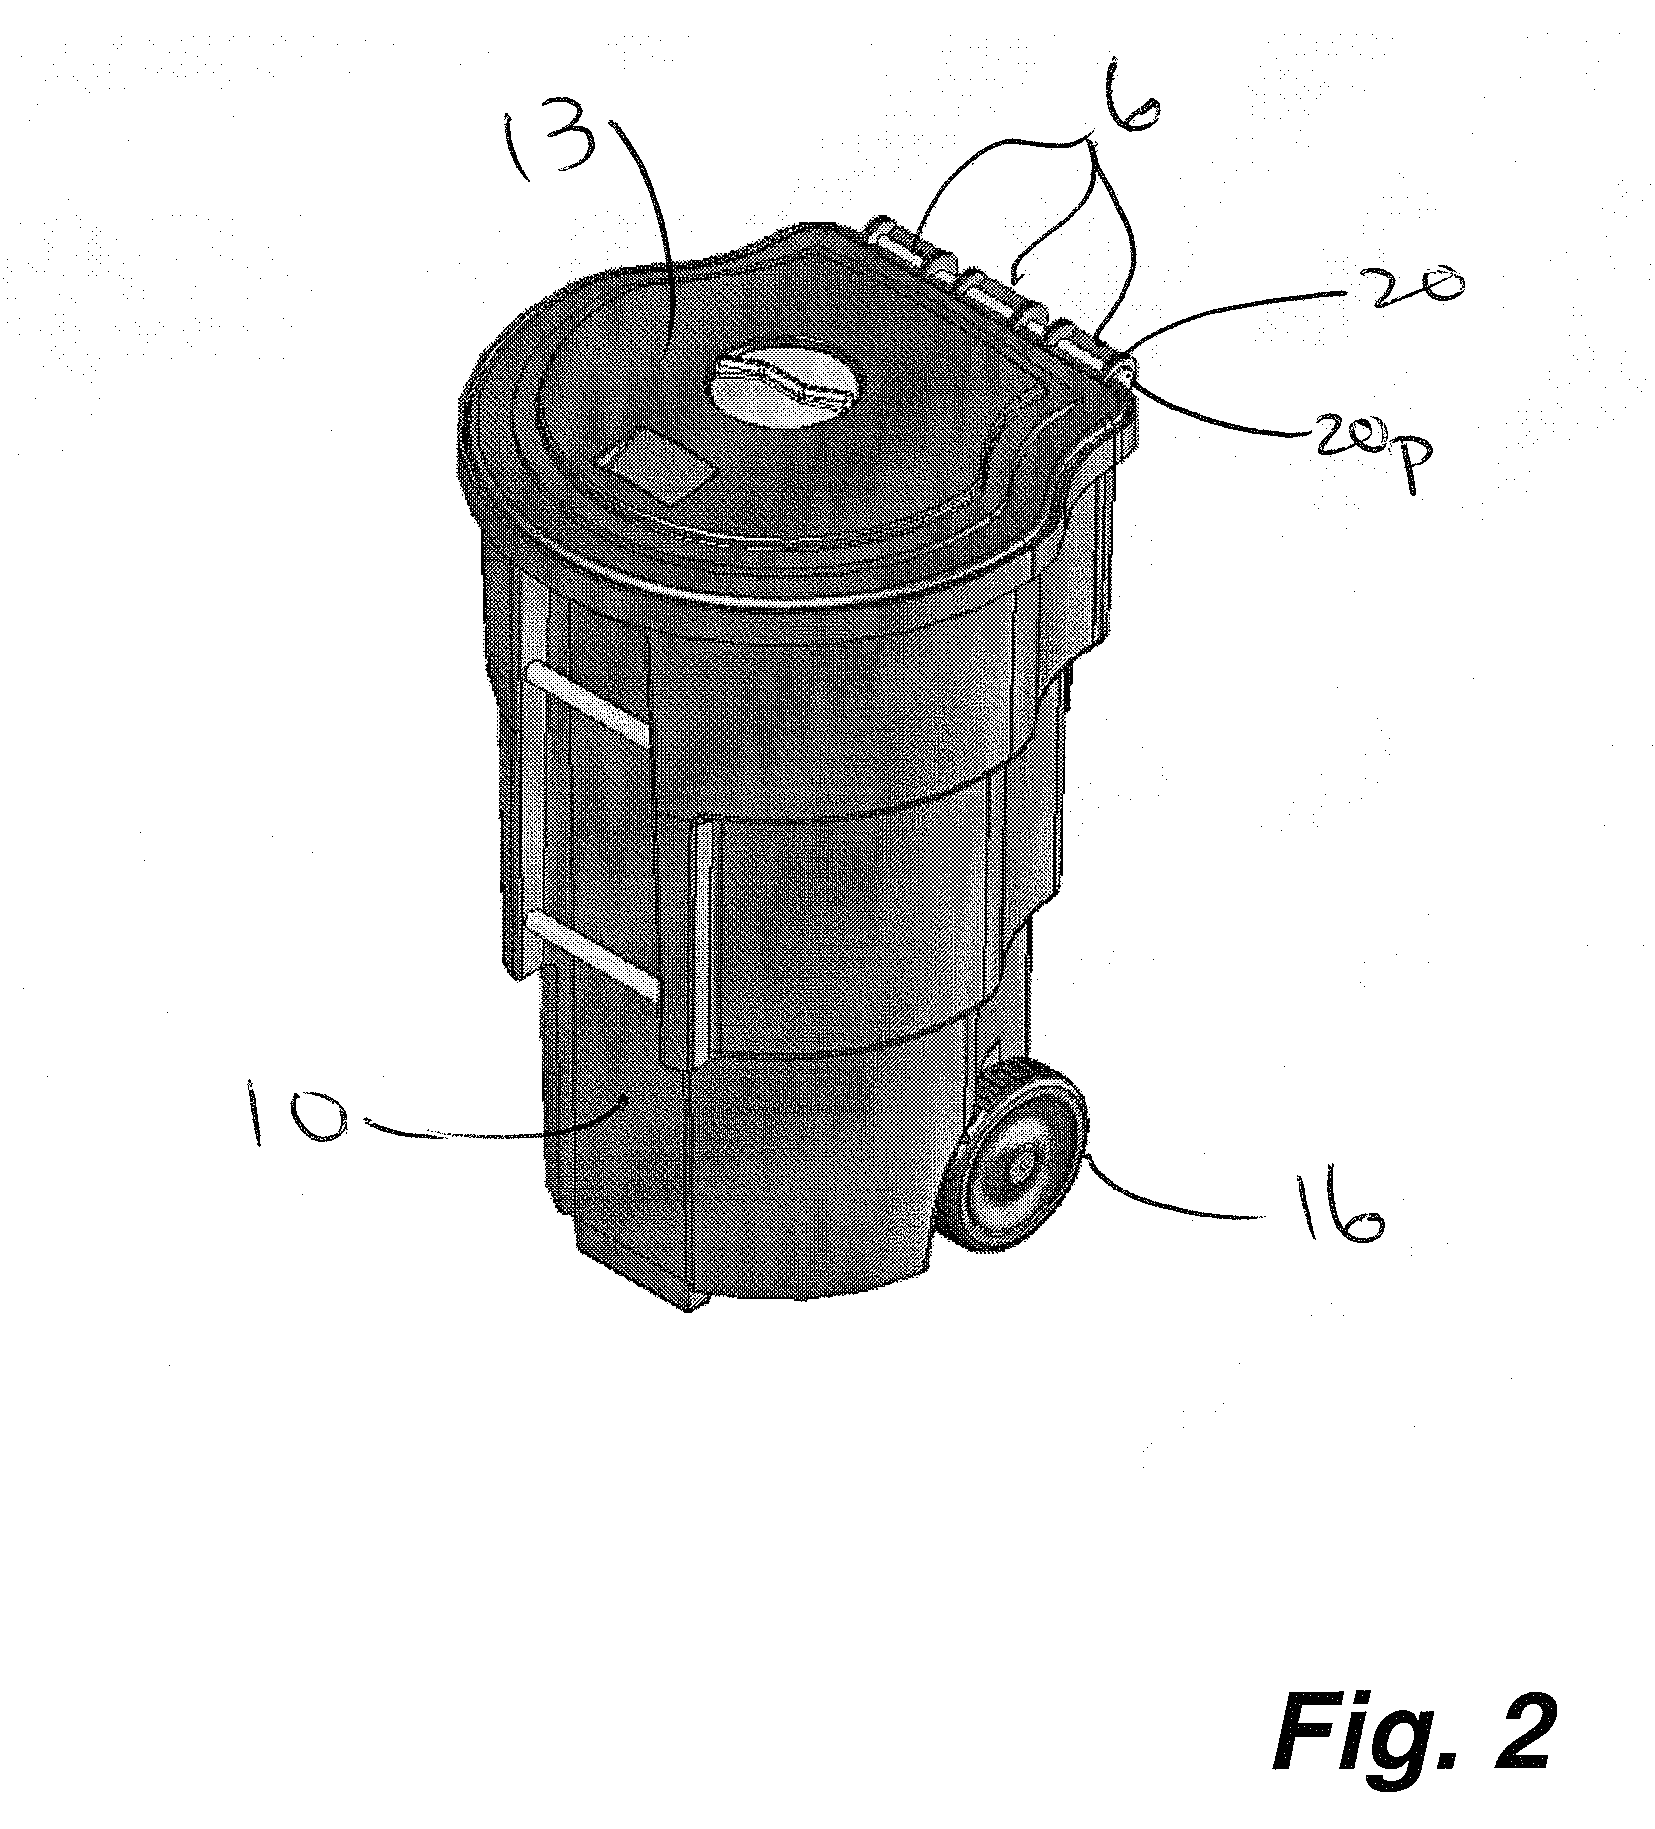 Animal-resistant resilient trash container and lid mechanism